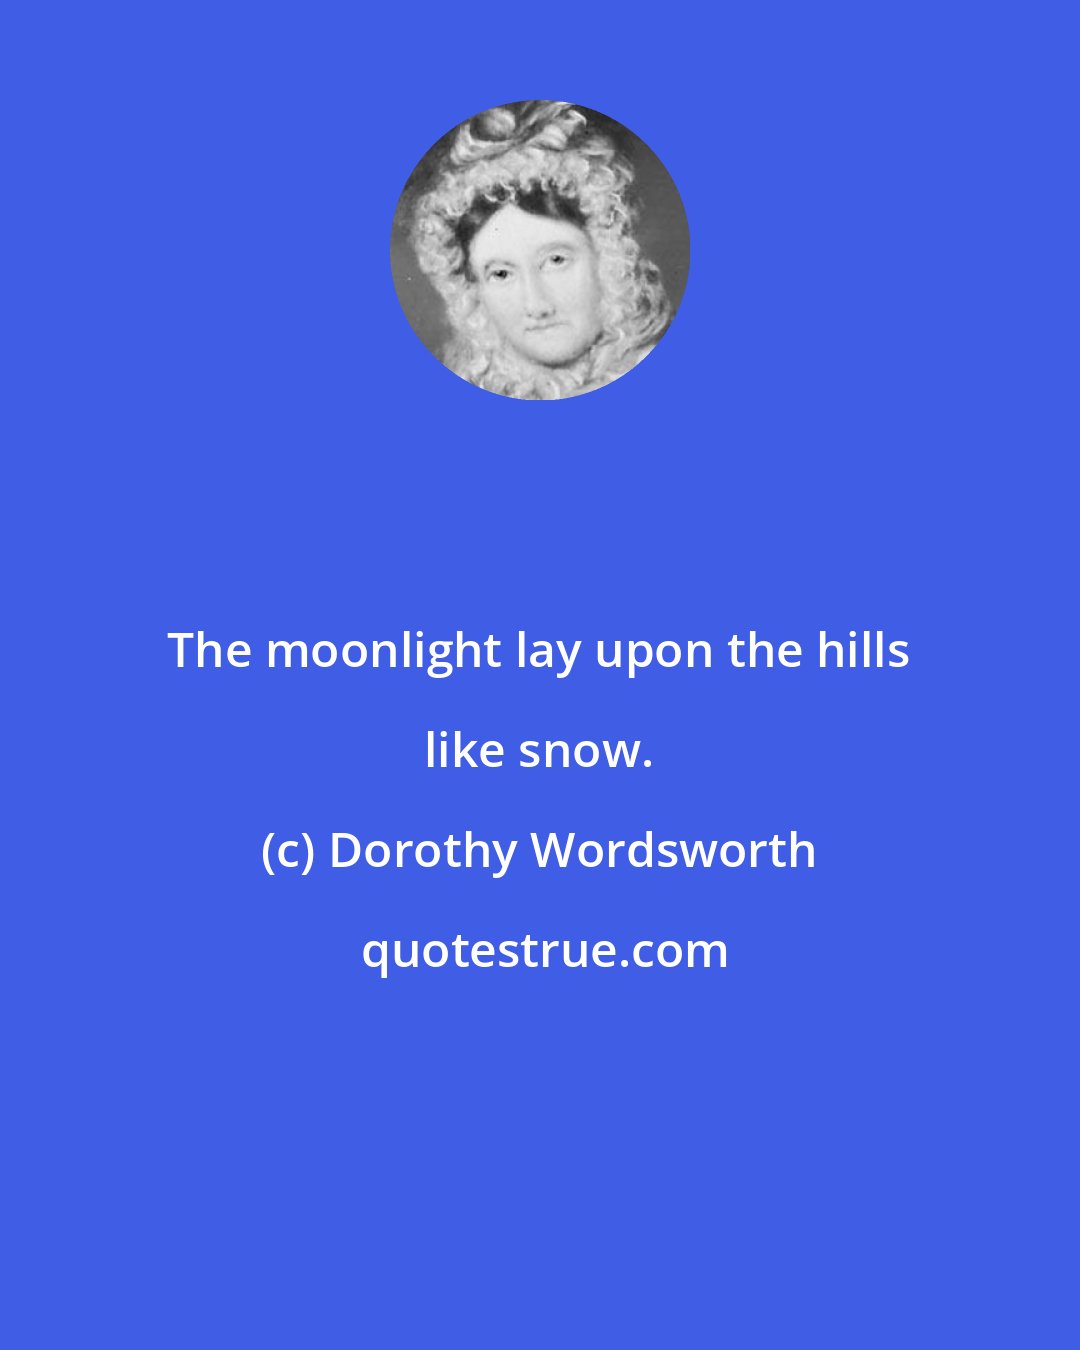 Dorothy Wordsworth: The moonlight lay upon the hills like snow.